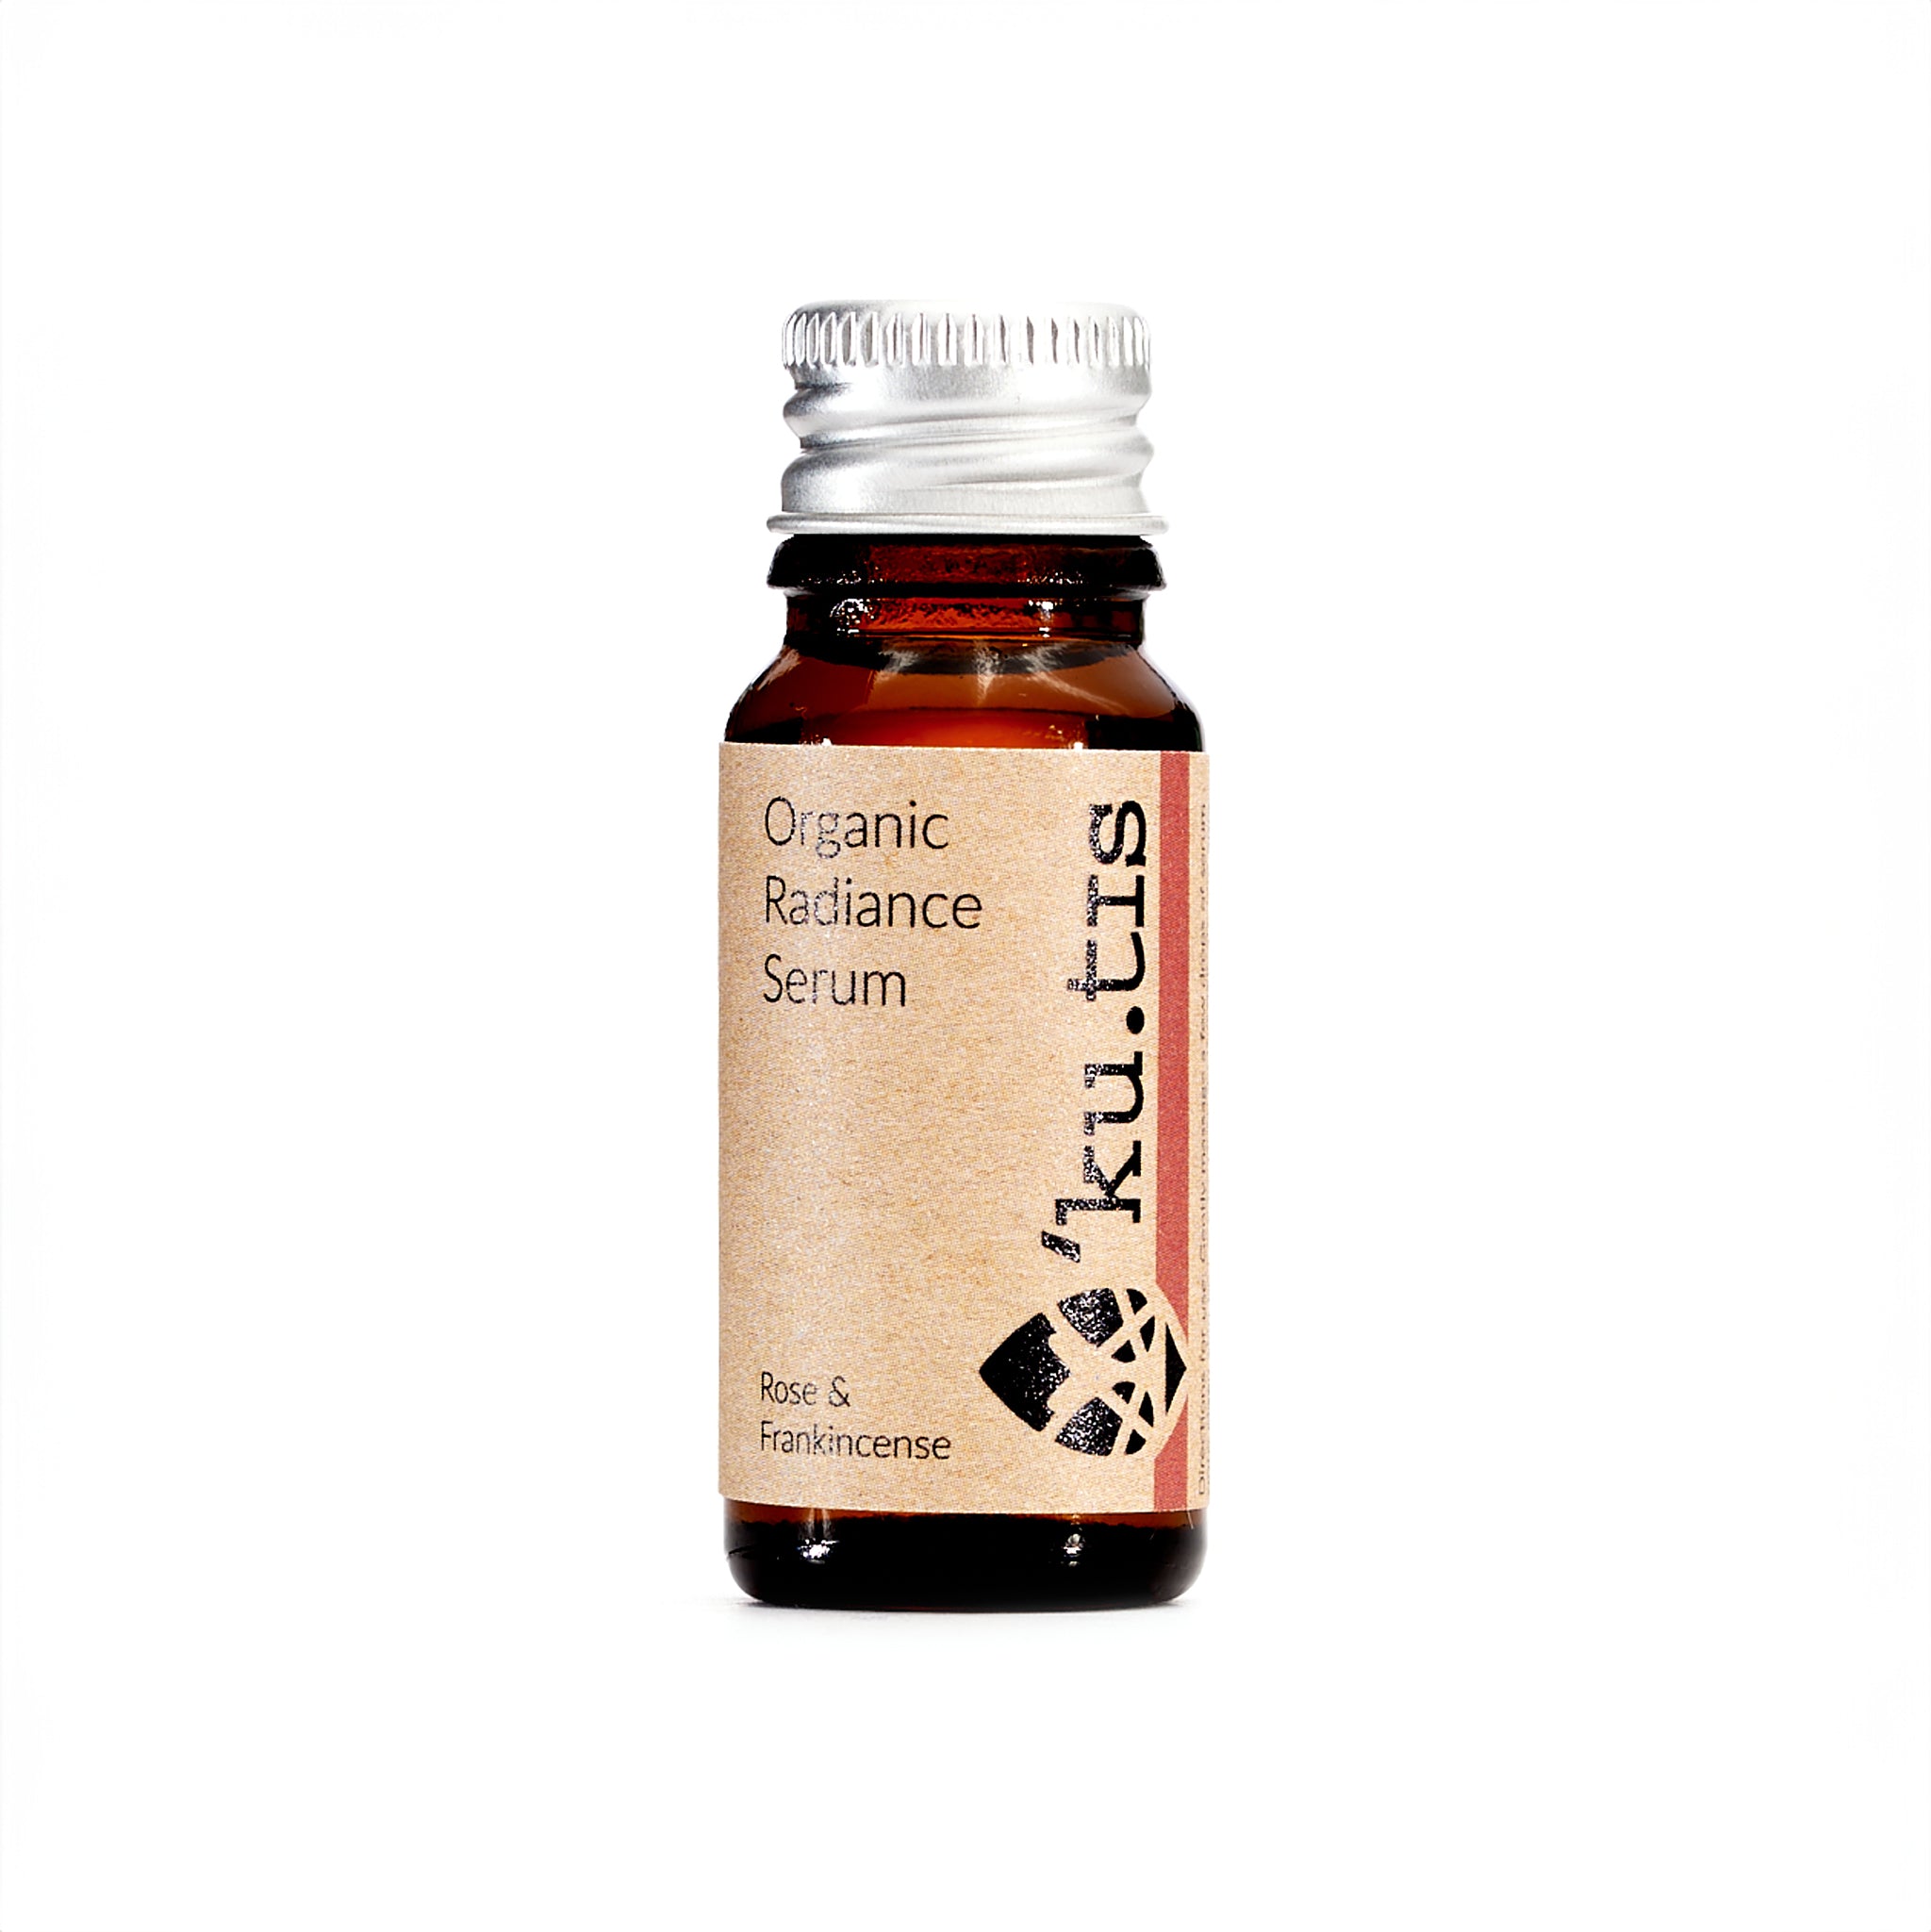 Natural organic radiance rose and frankinscense face oil serum in a glass bottle with aluminium cap